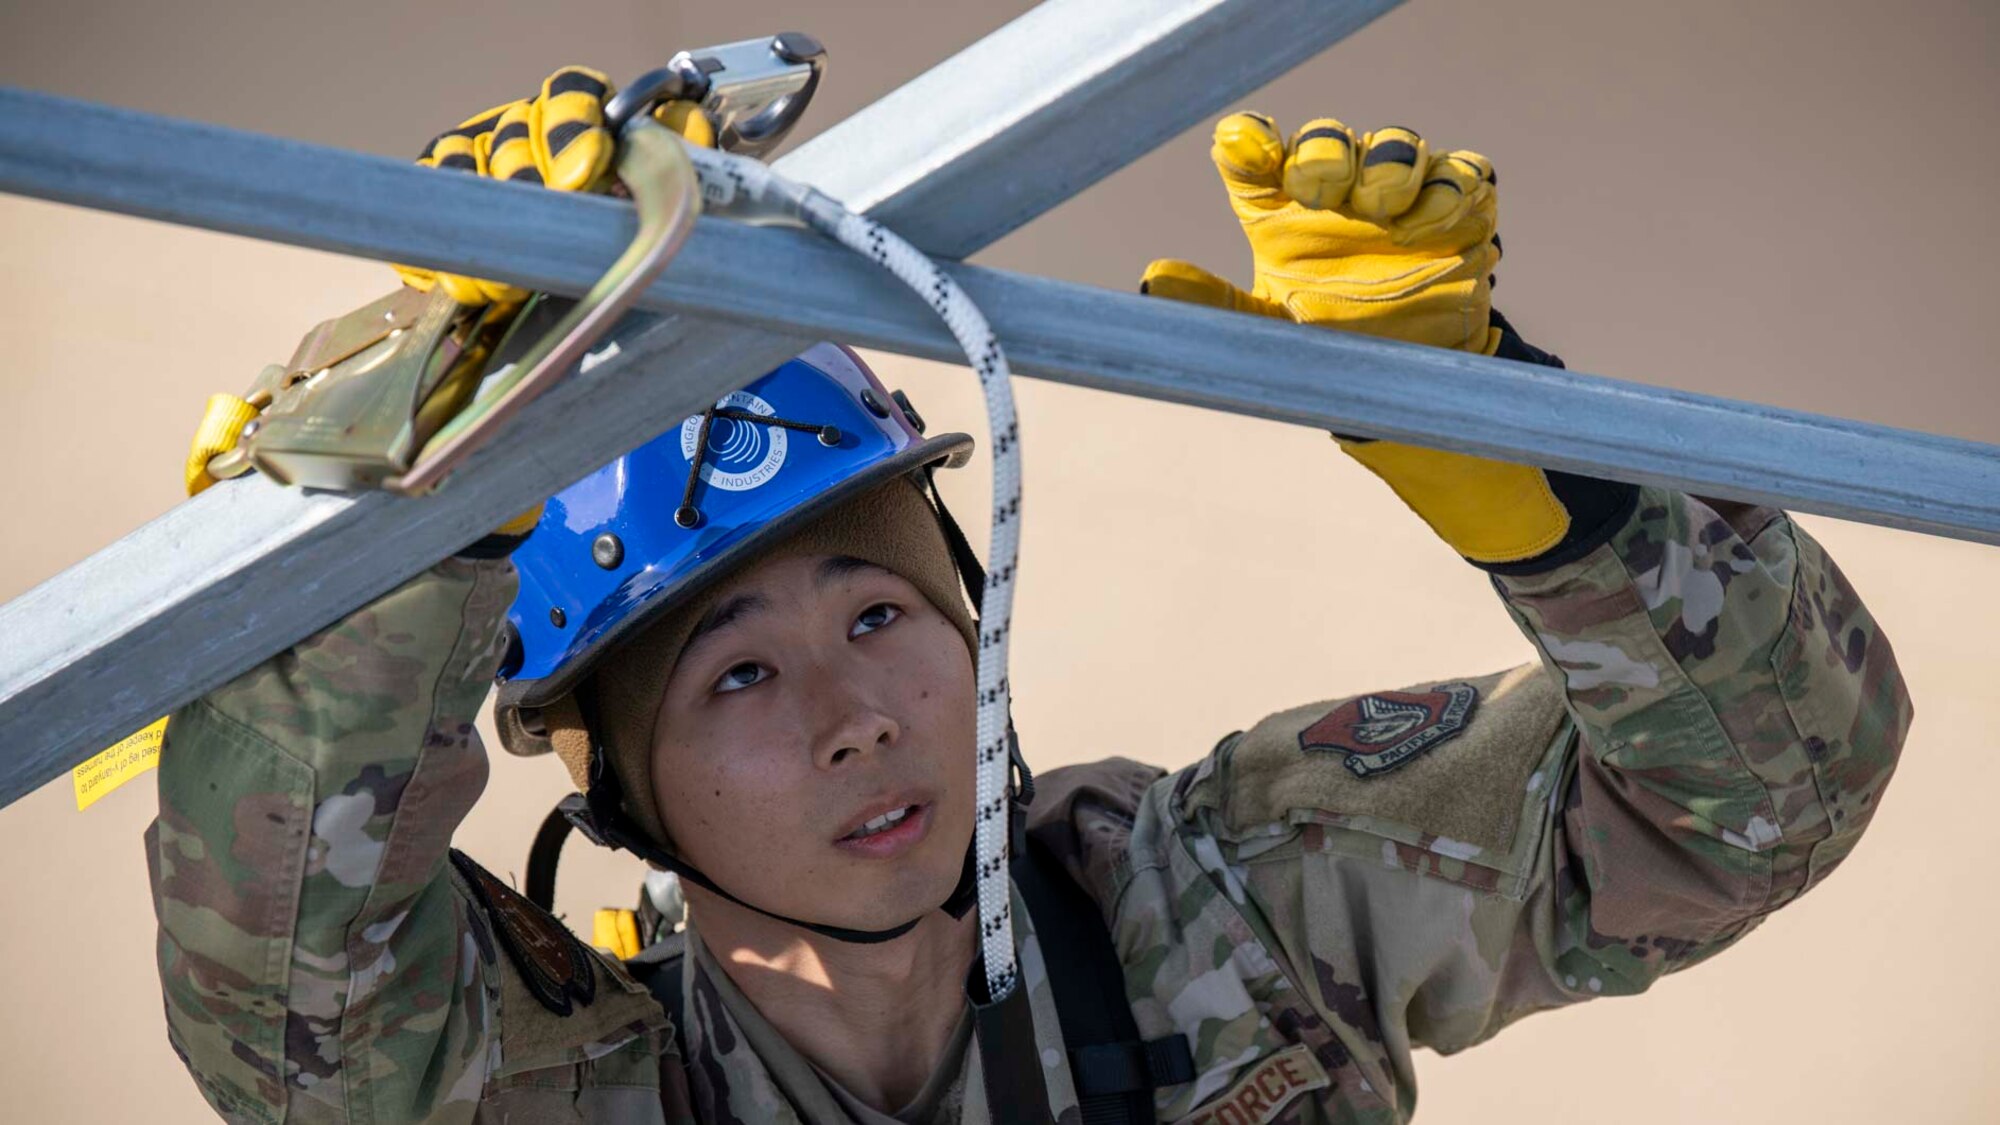 A military member climbs up a tower.